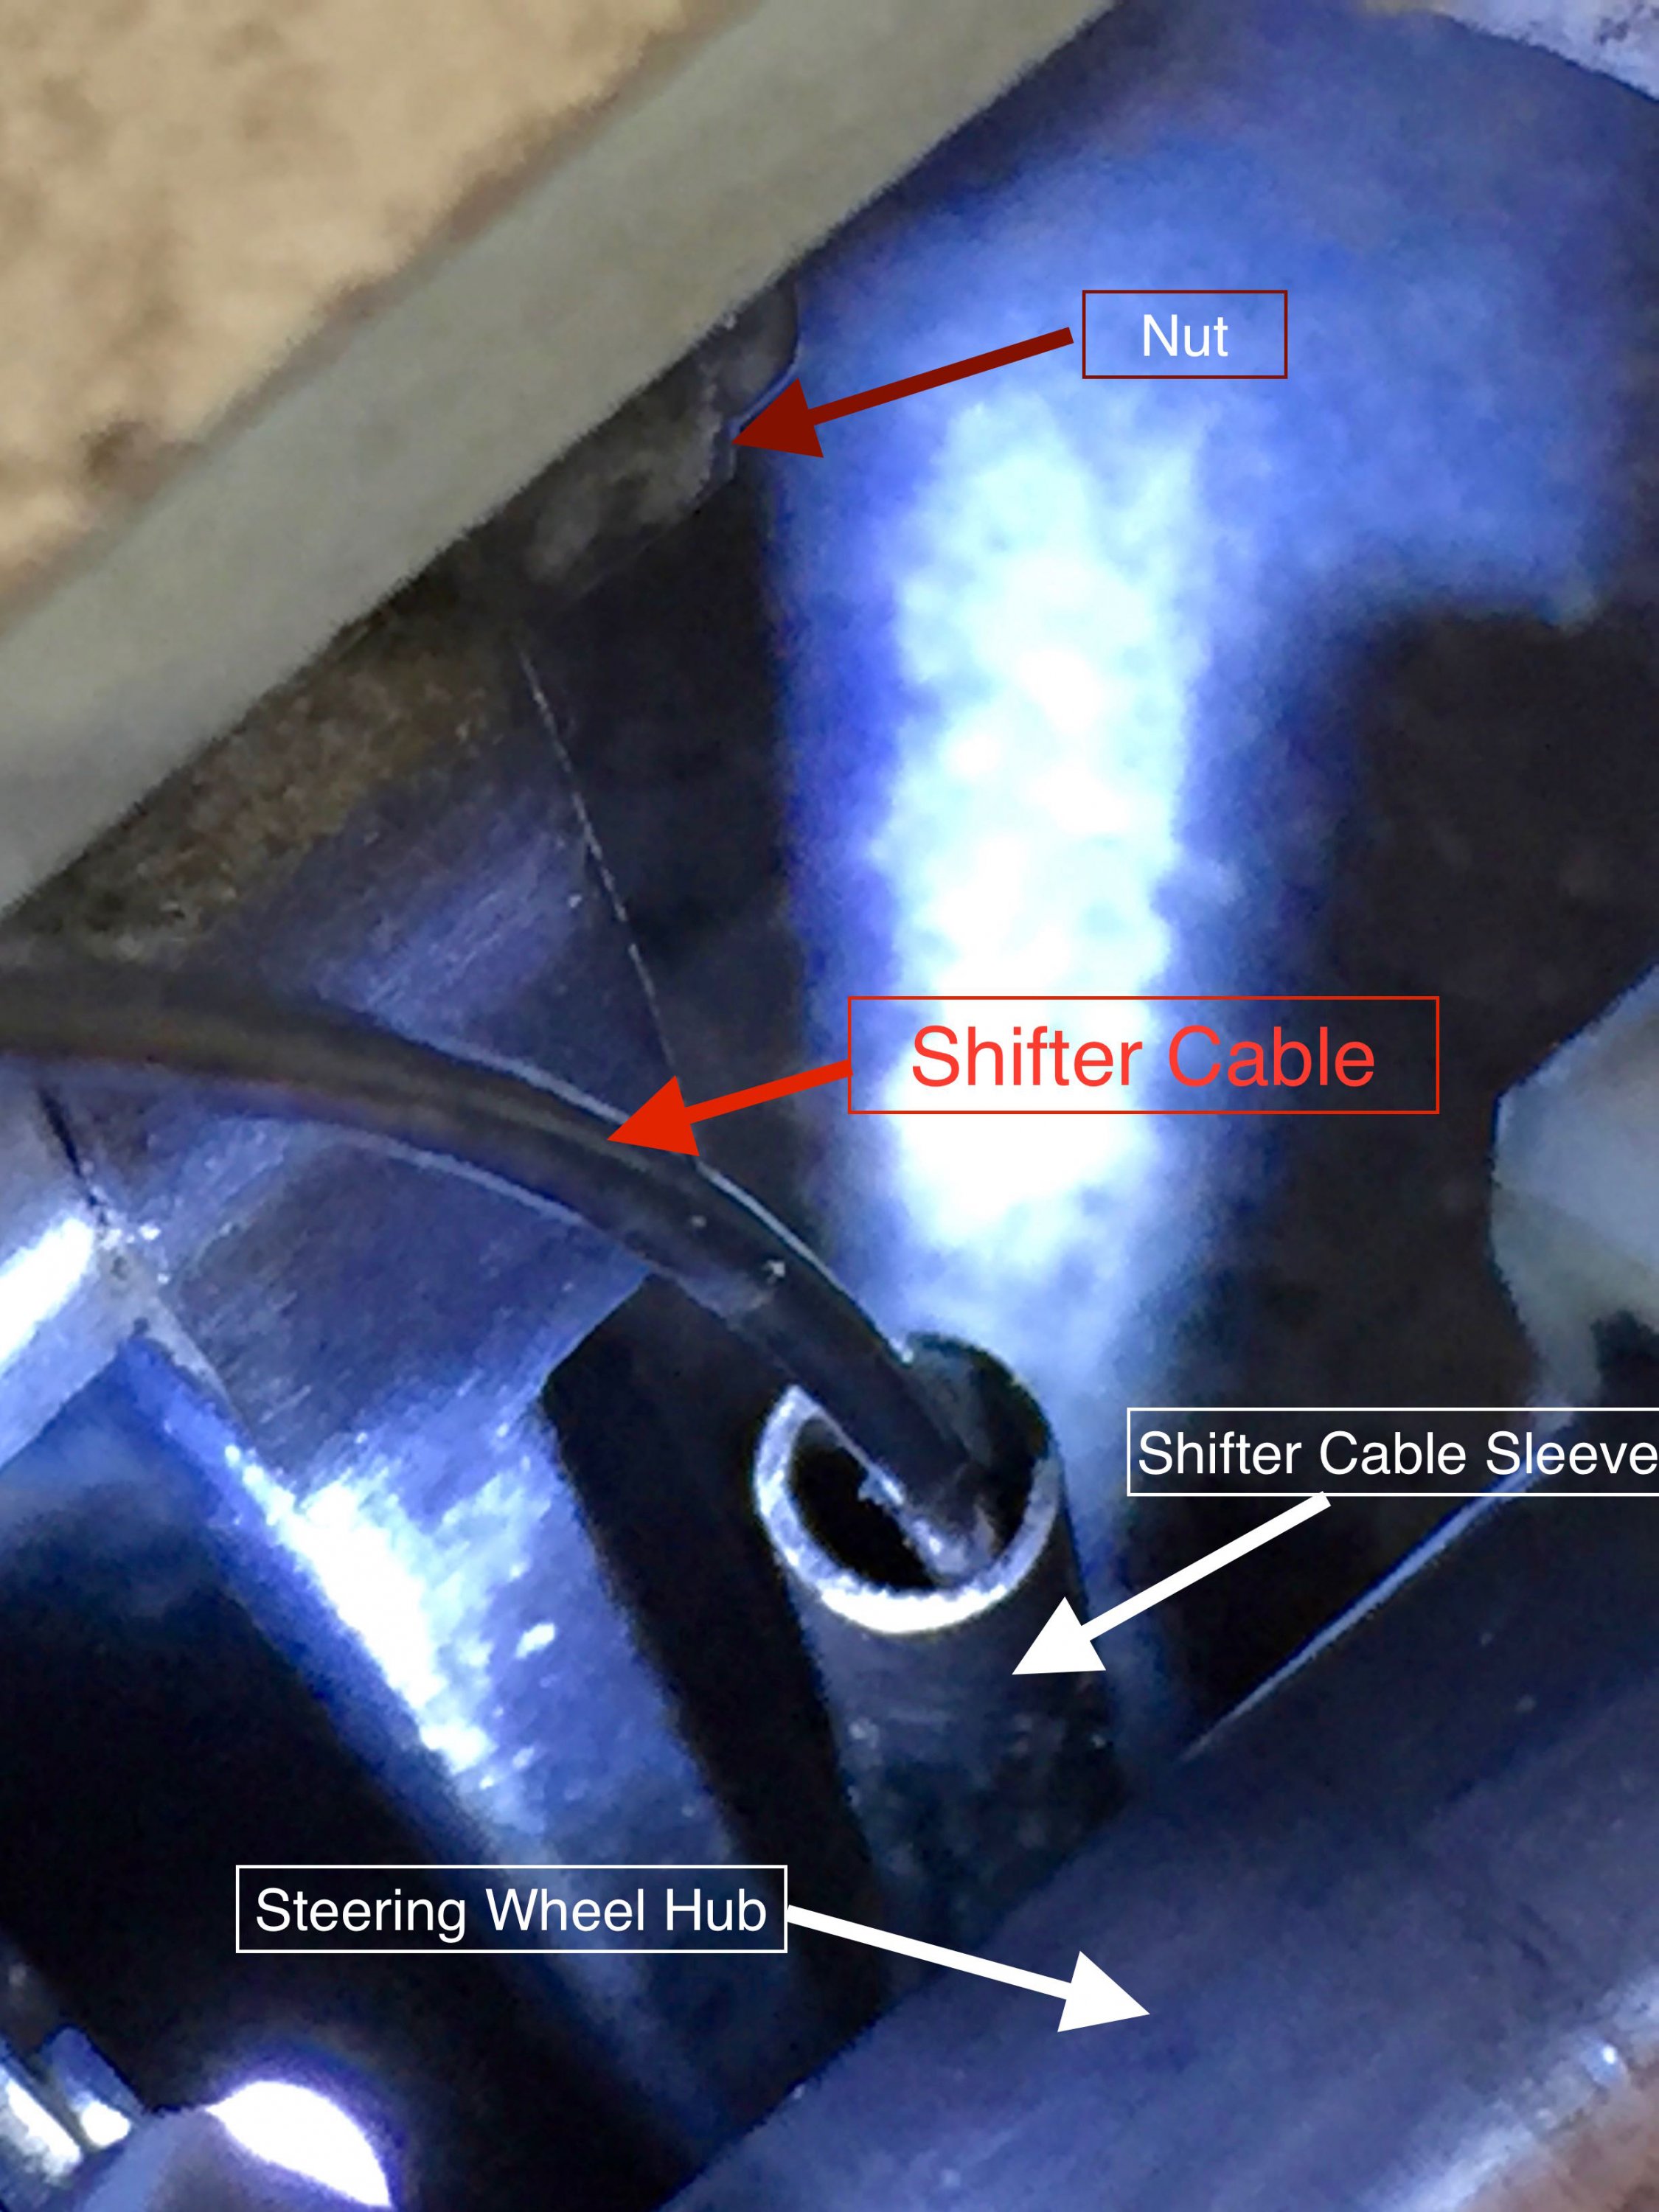 Shifter Cable in Pedestal.jpg